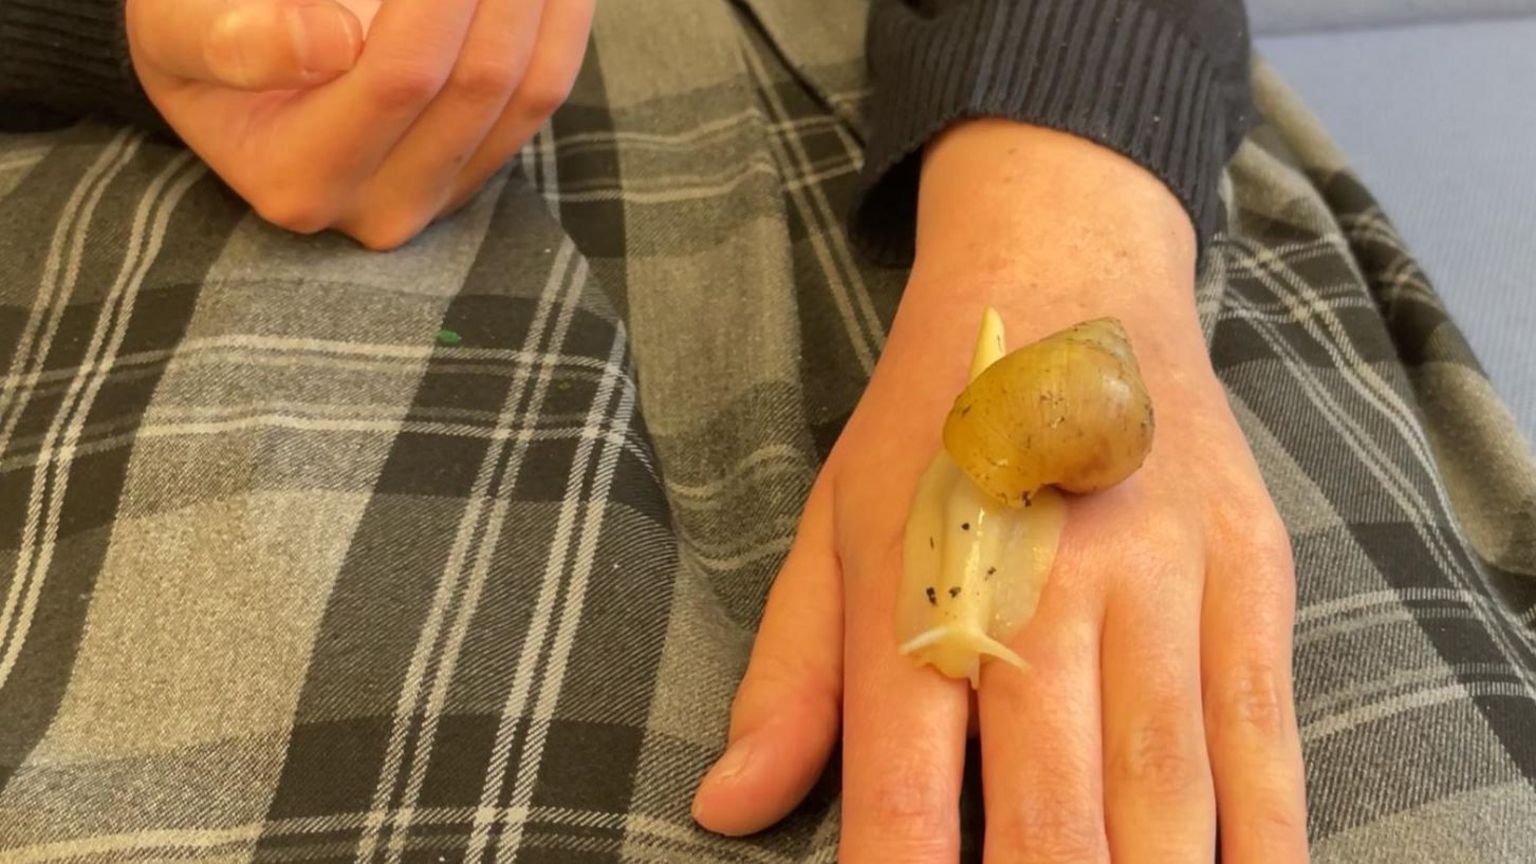 An albino giant African land snail on a student's hand